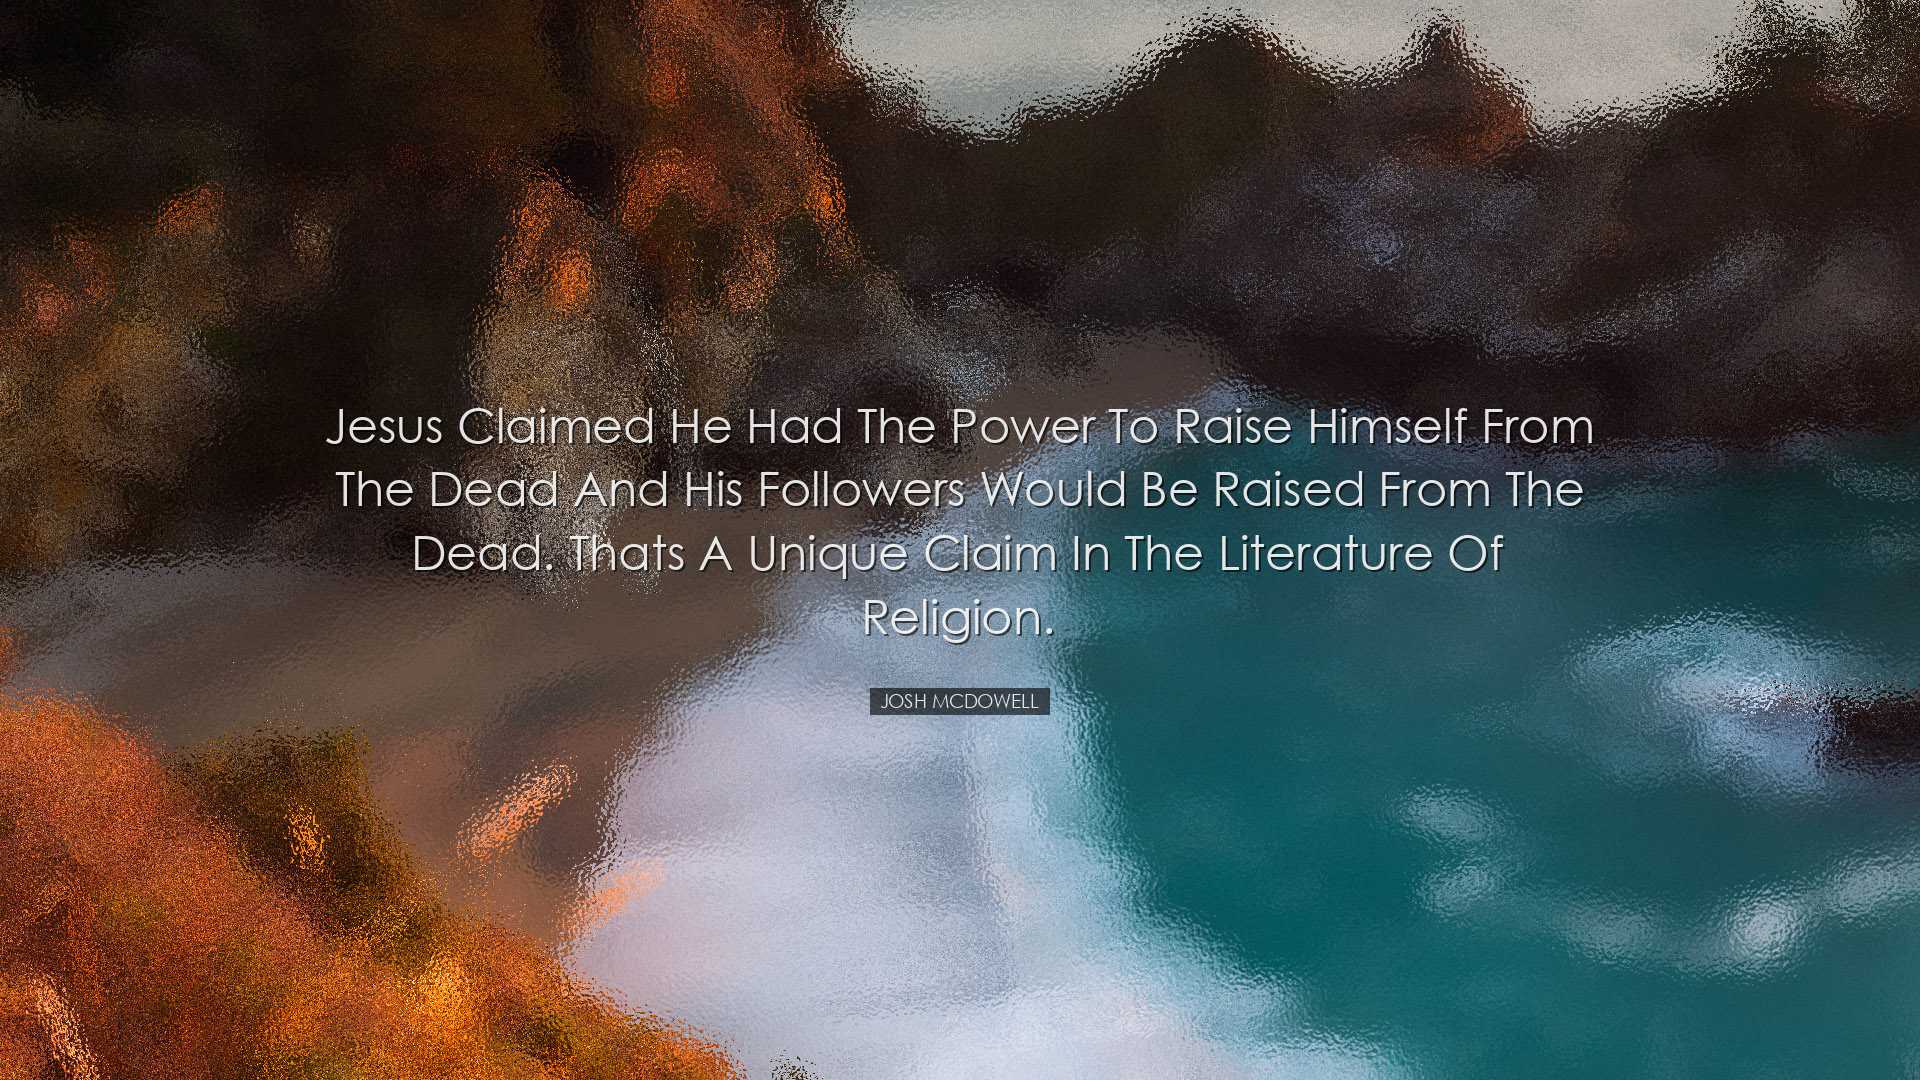 Jesus claimed He had the power to raise himself from the dead and